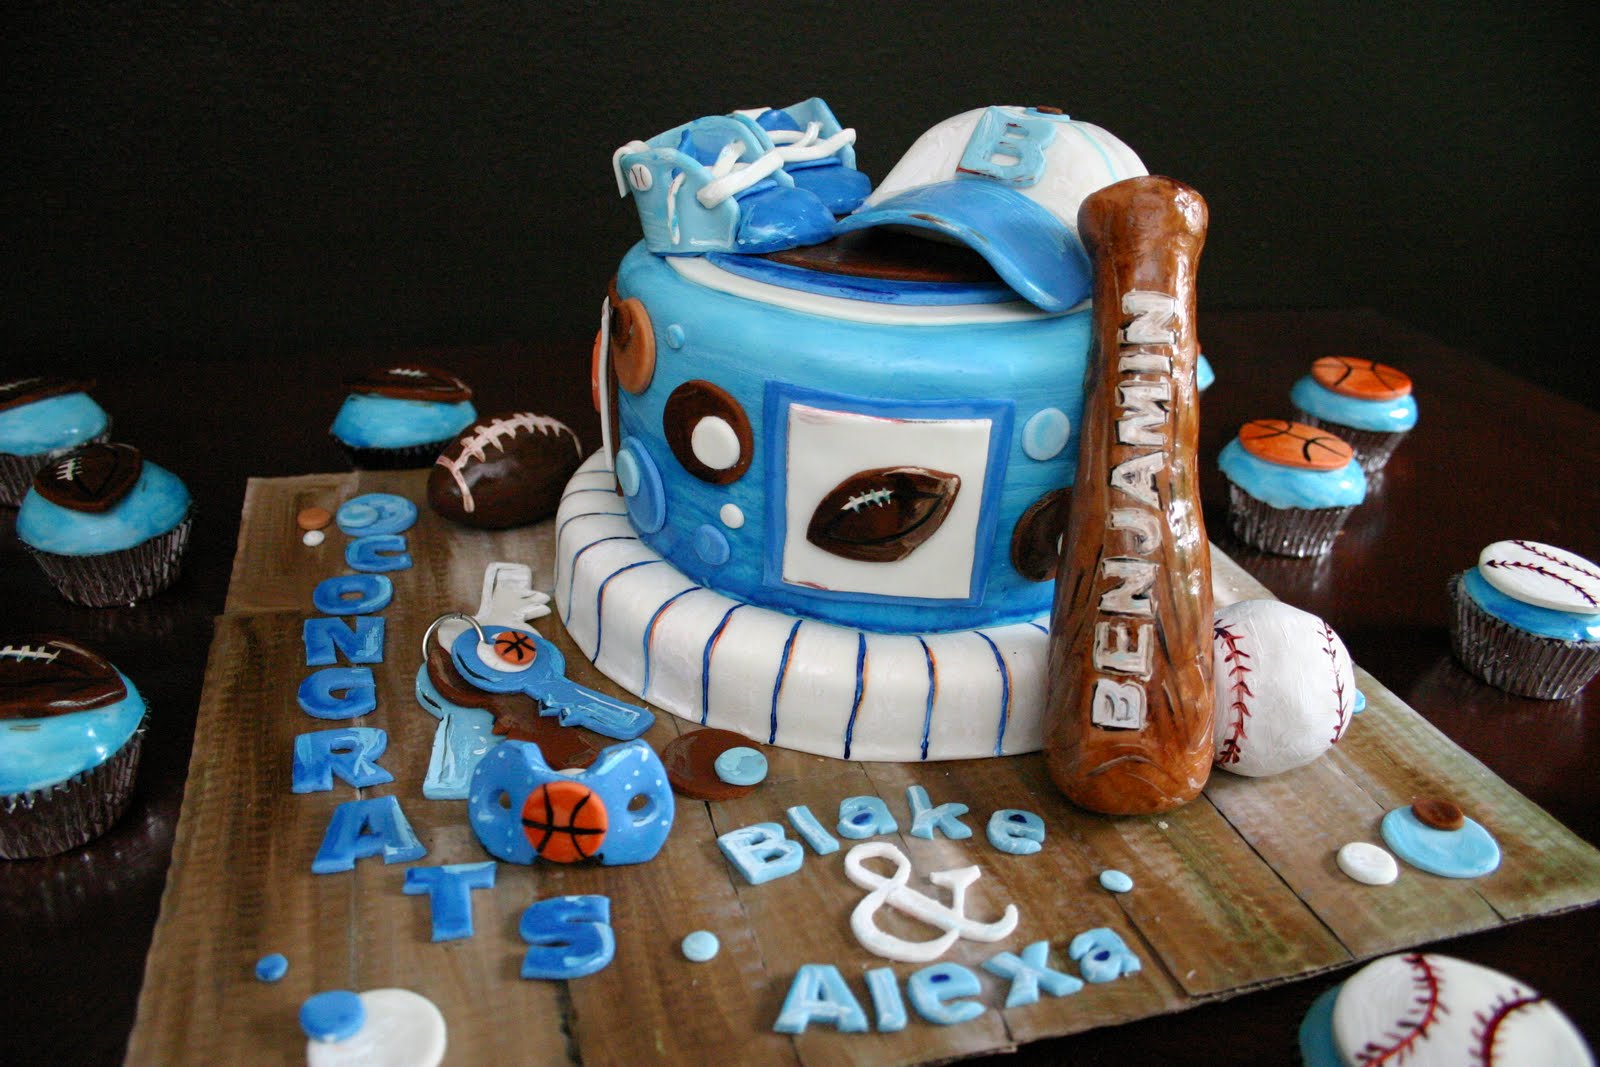 Sports Themed Baby Shower Cake